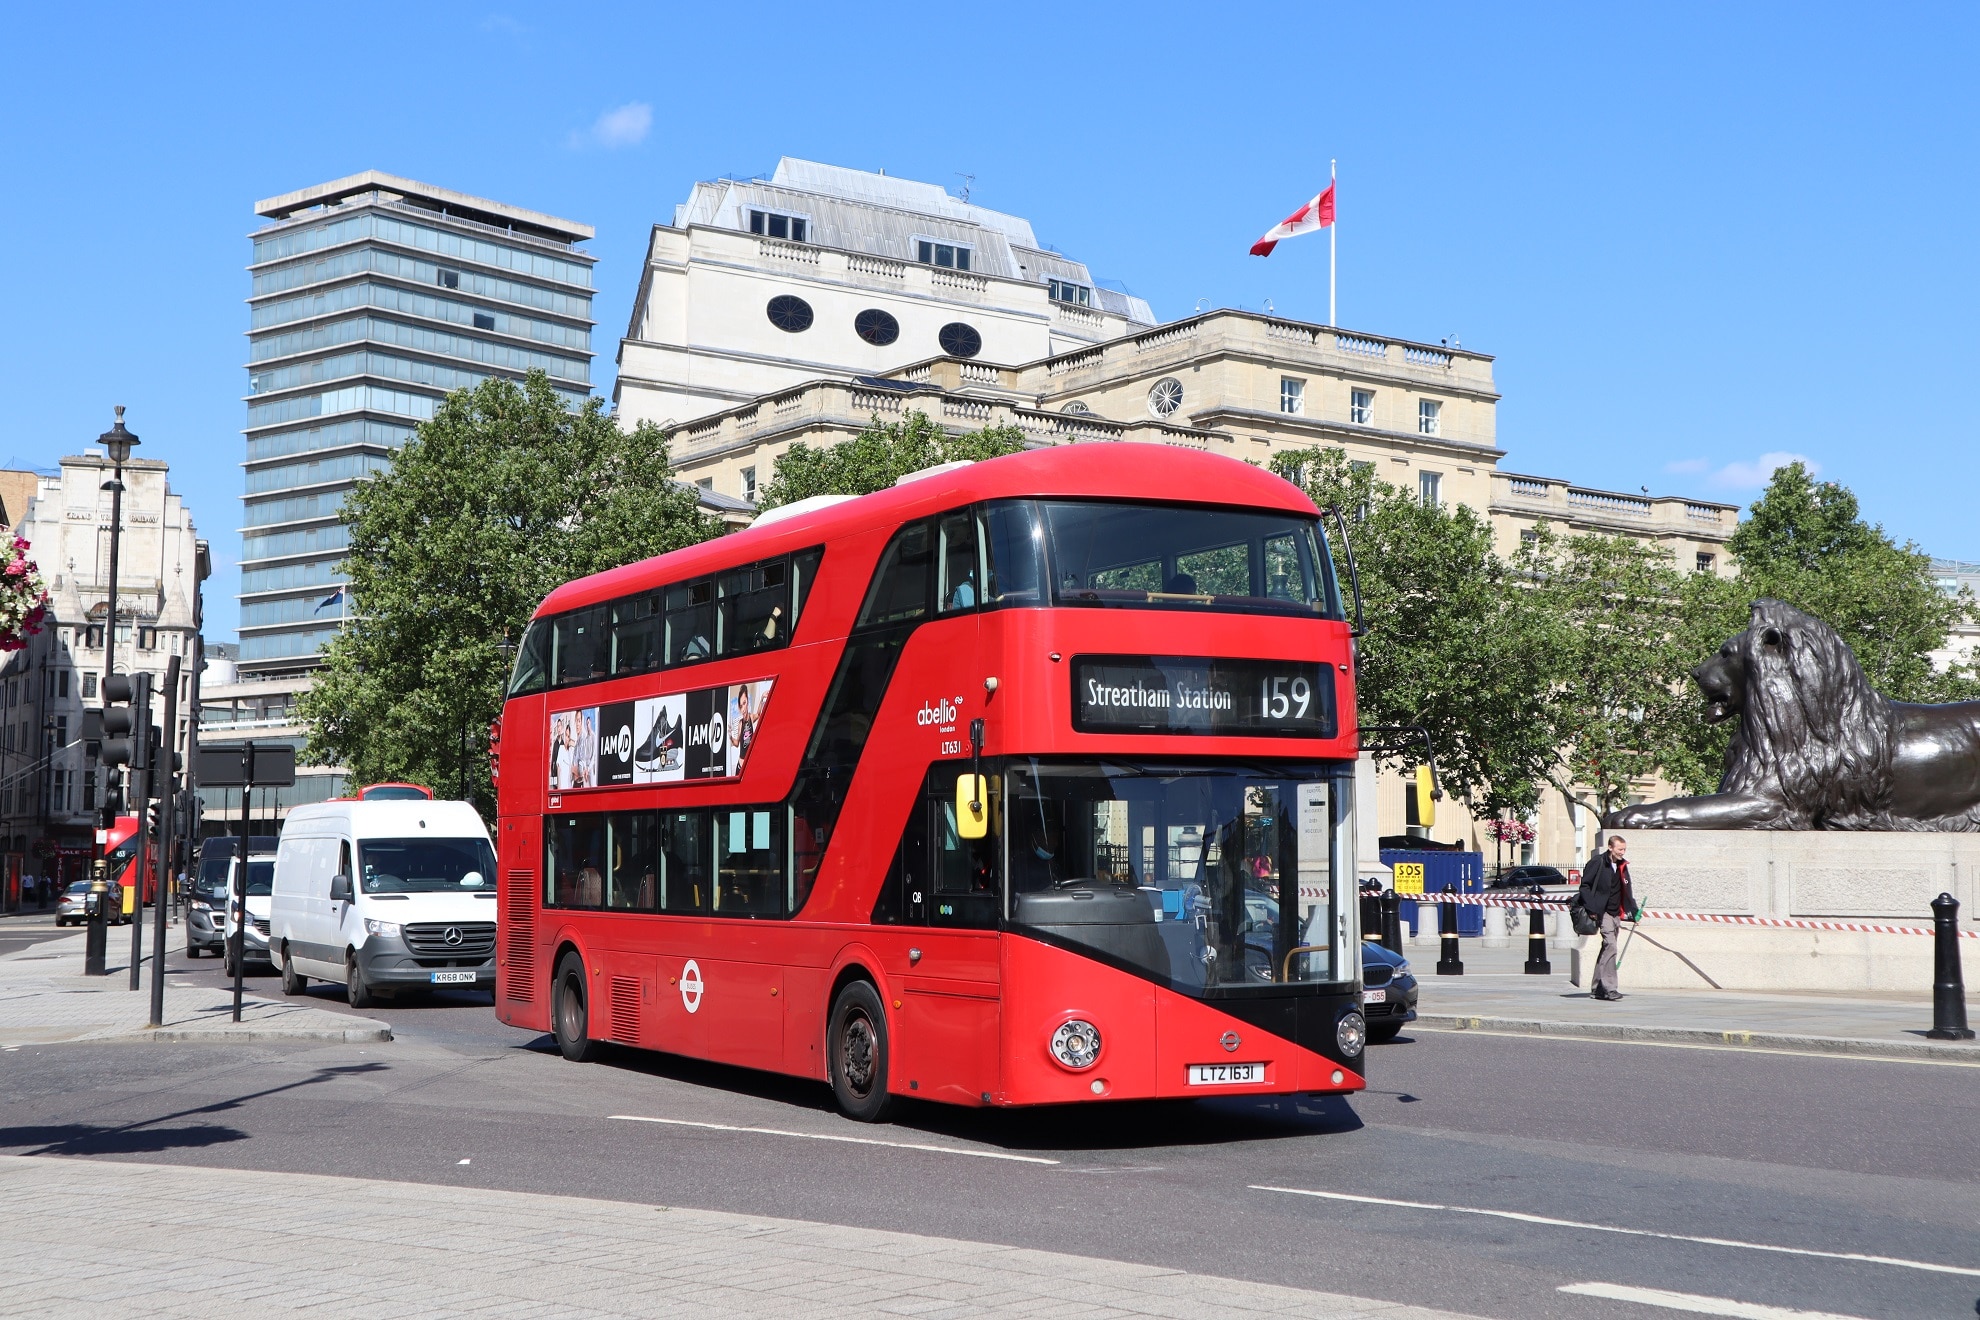 Bus industry now far removed from the 1990s, says Jon Eardley